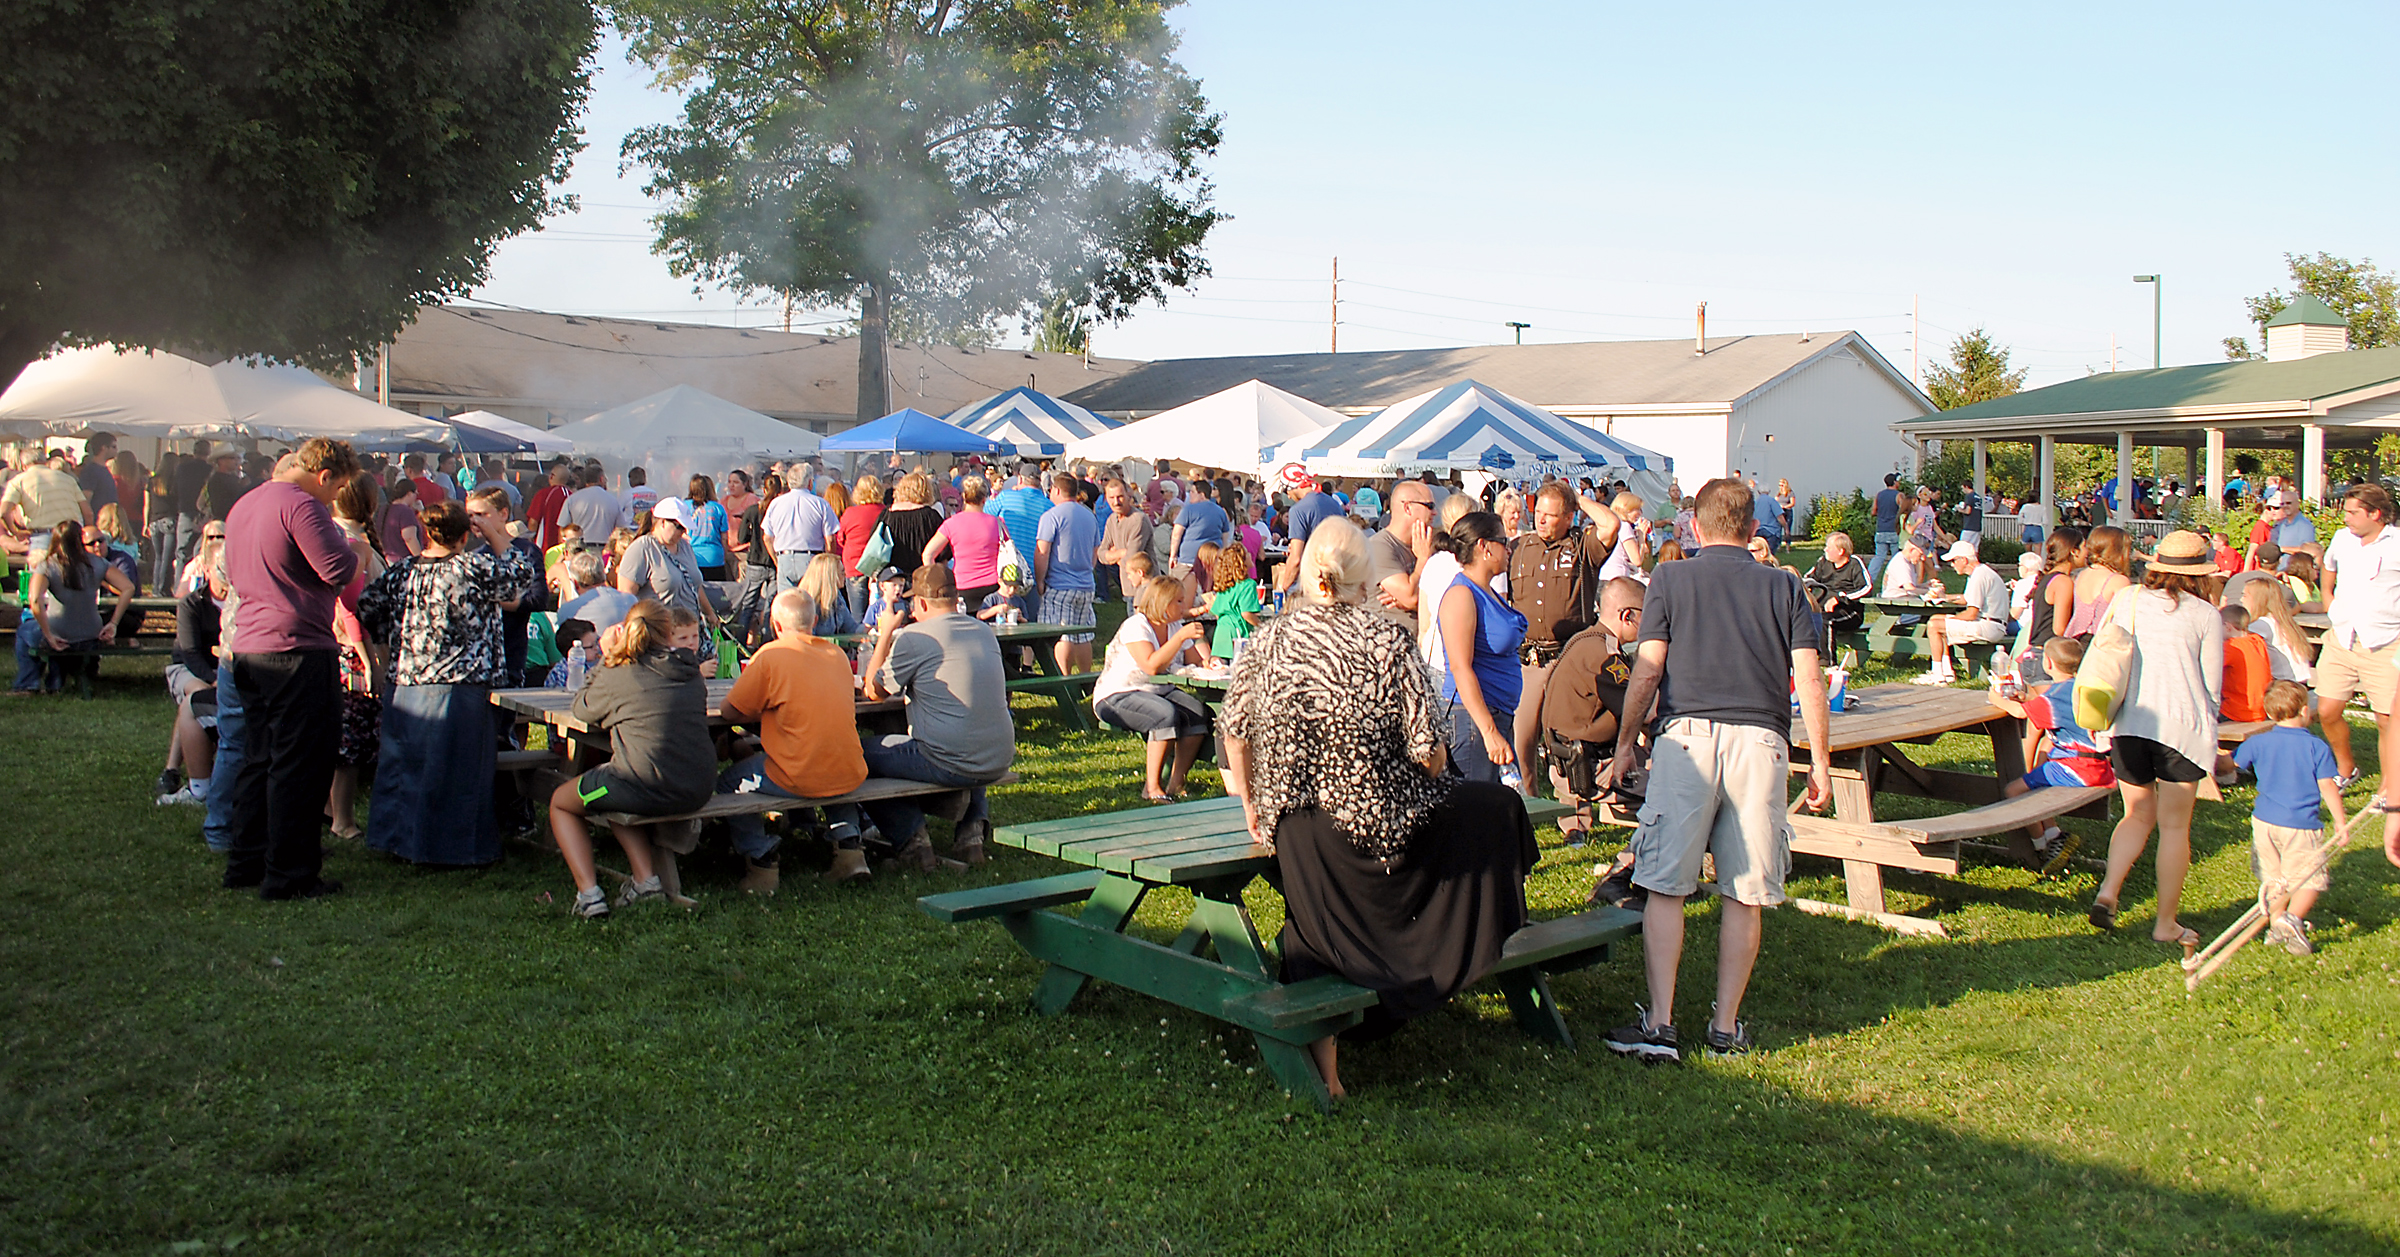 The pleasant temperatures throughout the 4-H Fair caused a good turnout of patrons and long lines in the food court, which caused many to sell out. (Photo by Robert Herrington) 